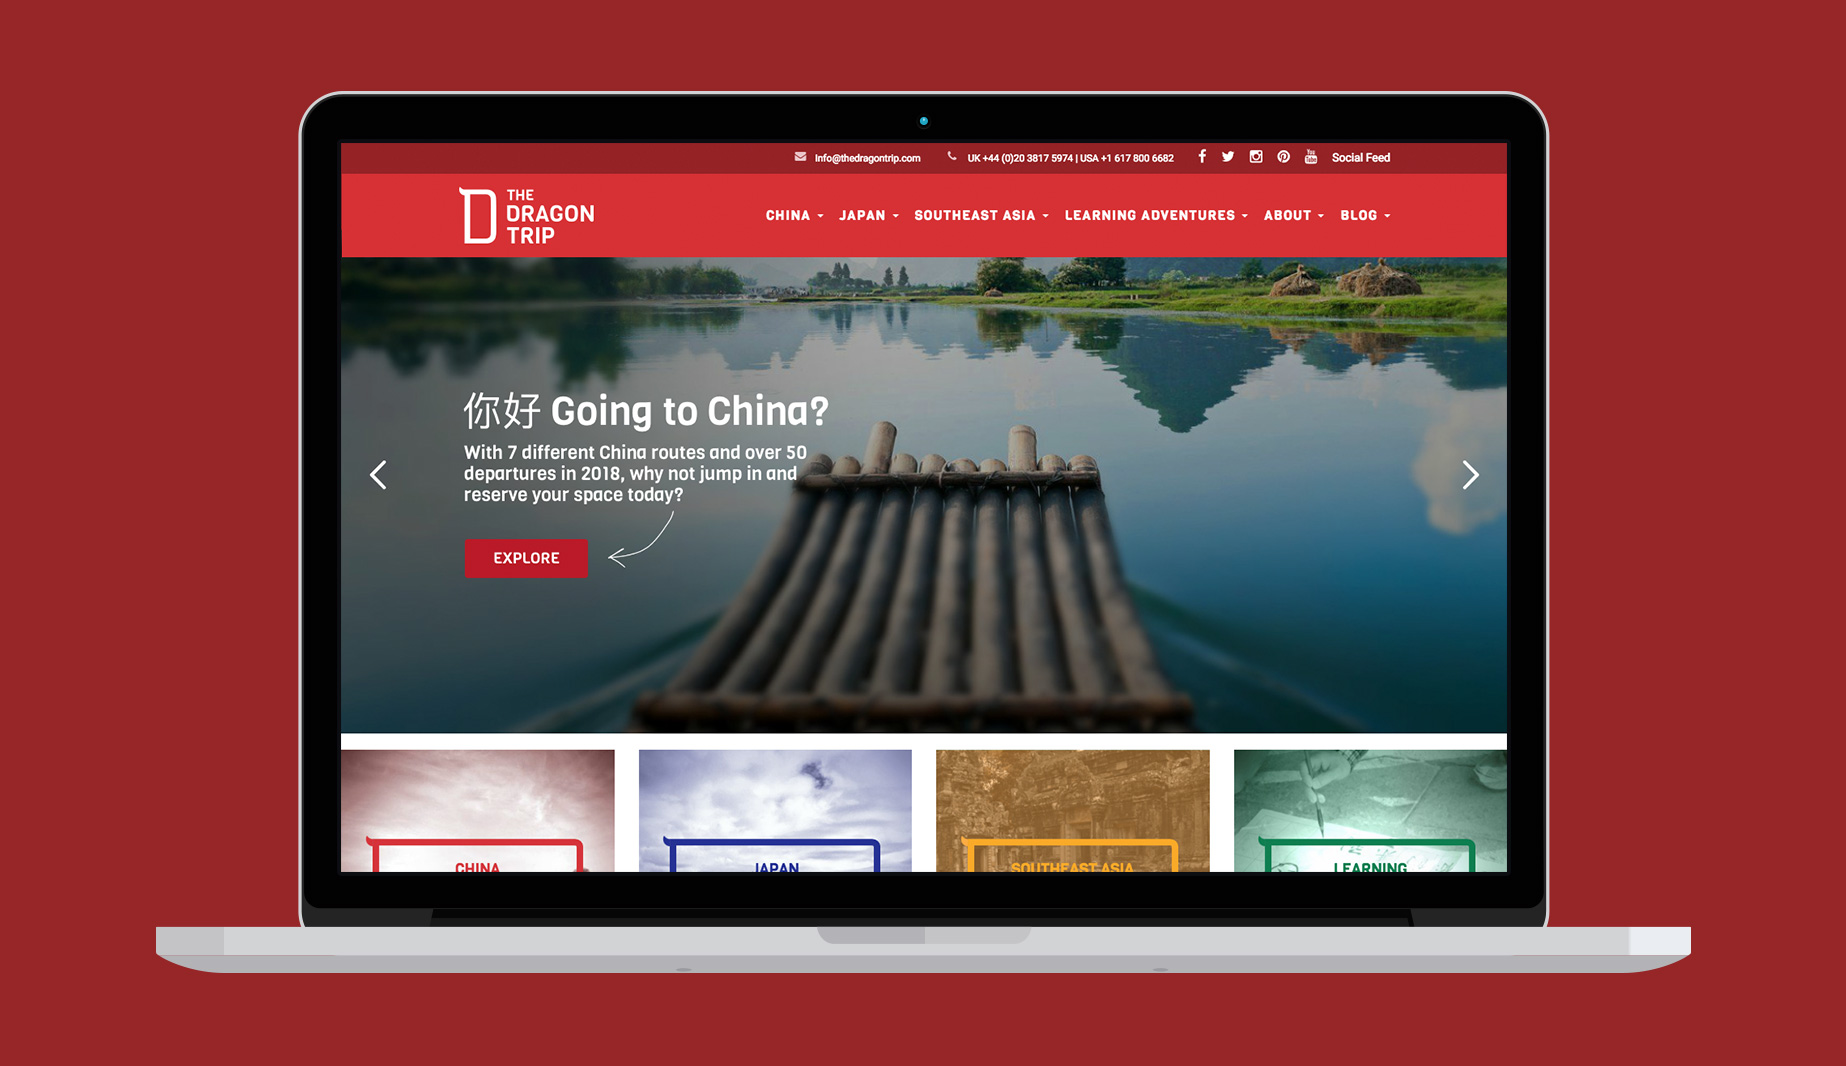 The Dragon Trip website design and build